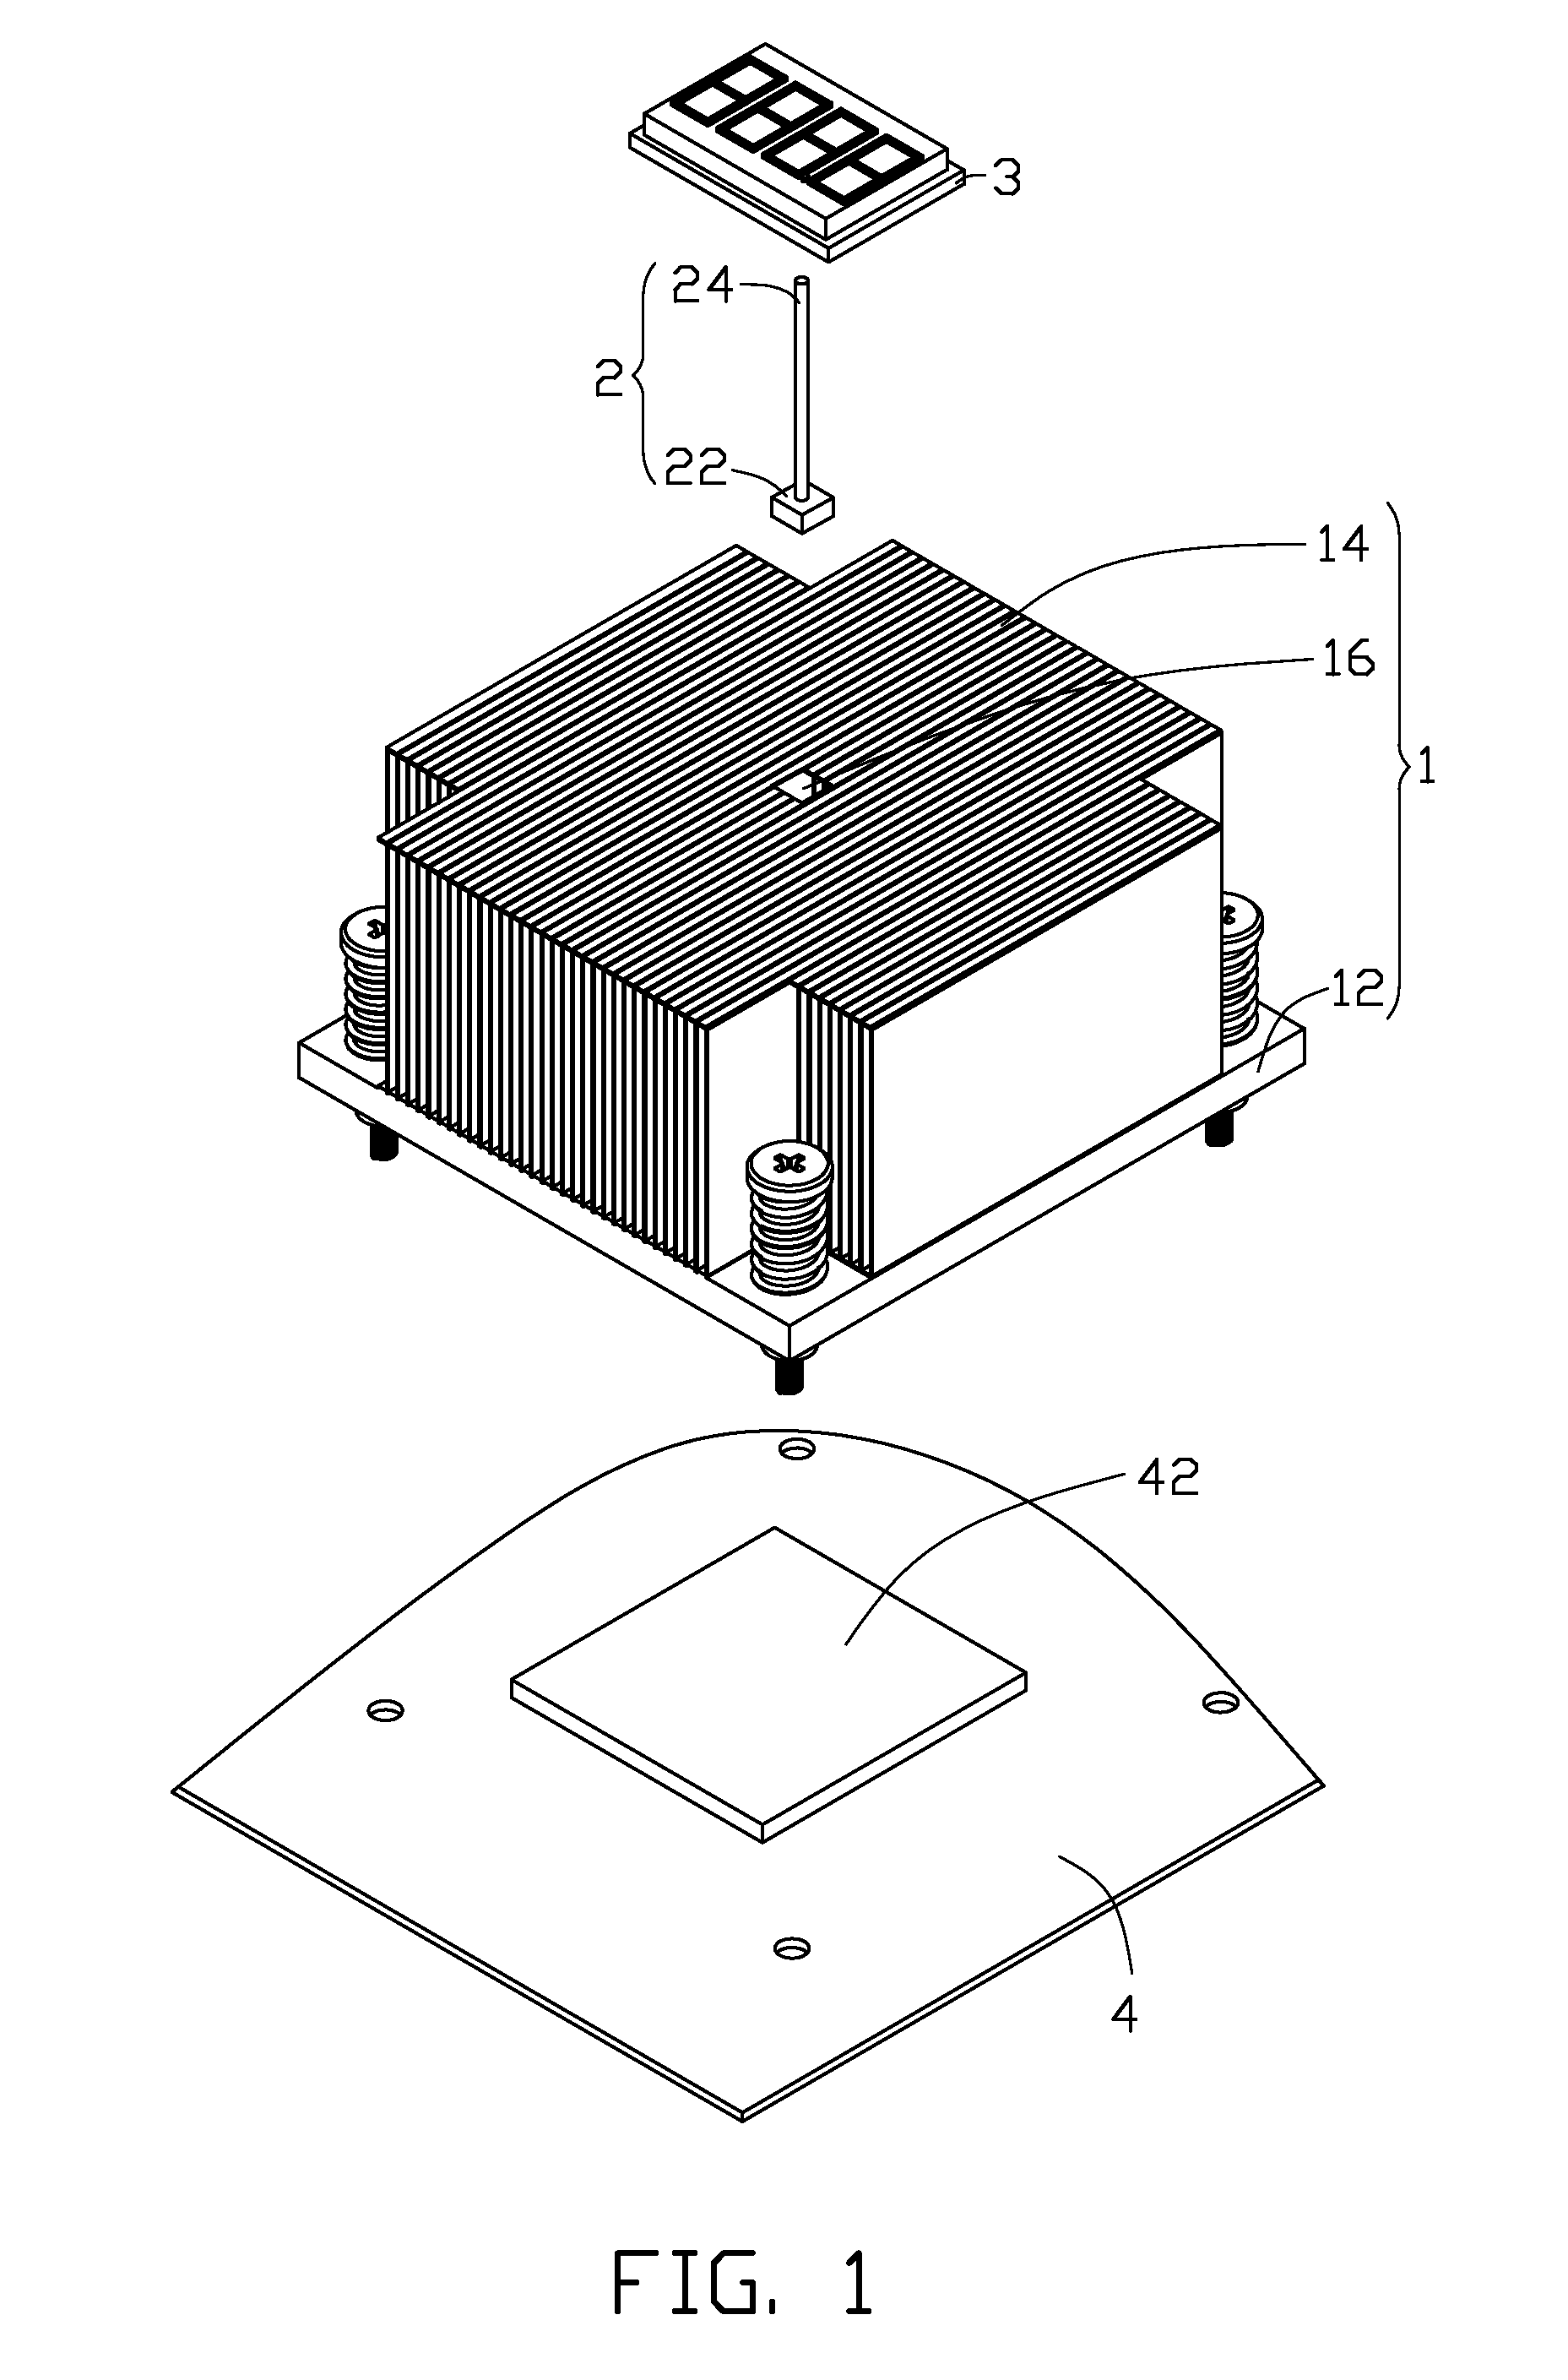 Heat sink assembly with temperature display